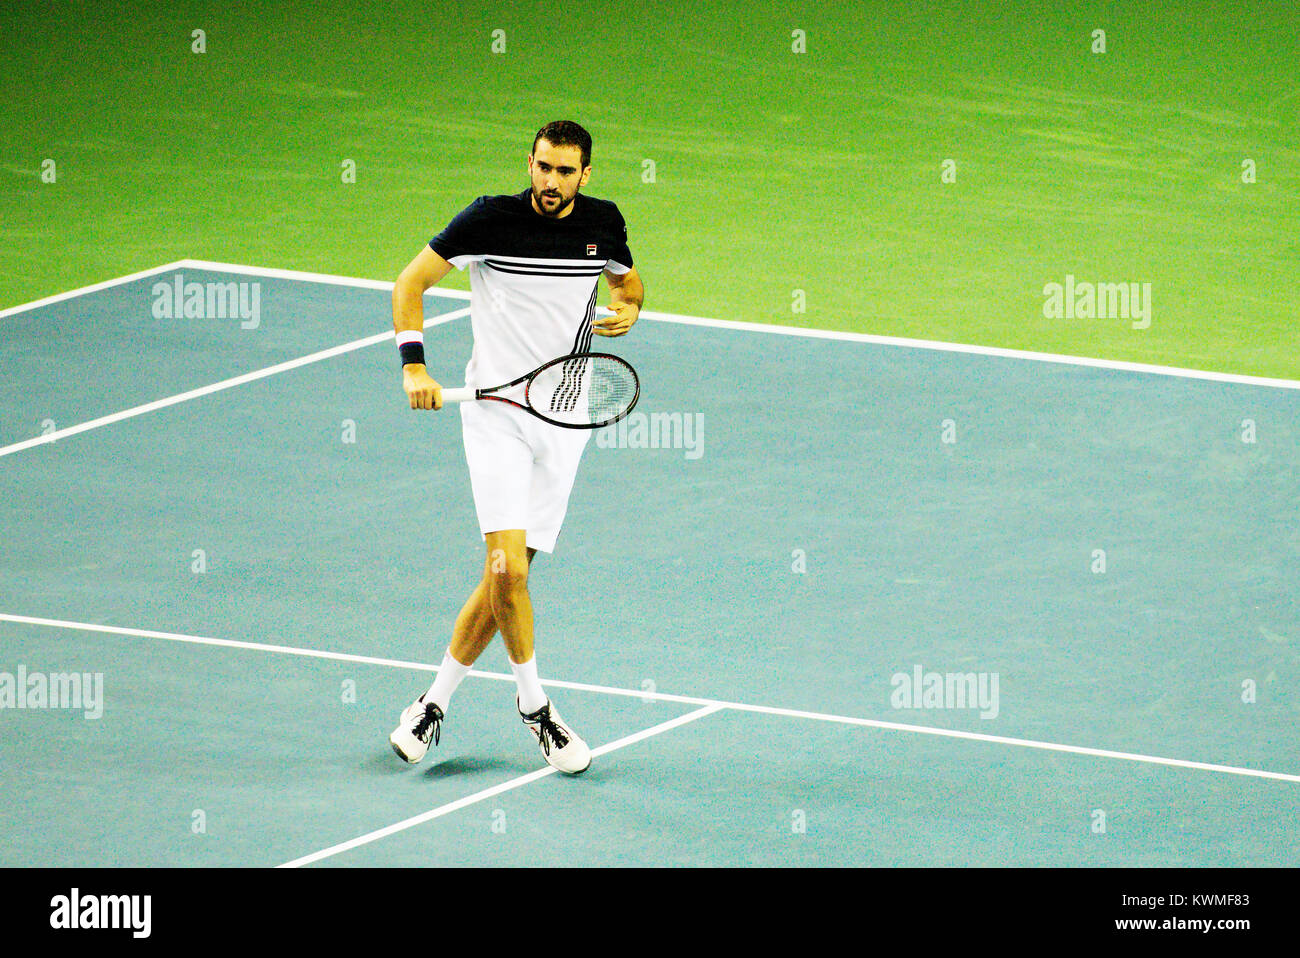 Pune, India. 3rd Jan, 2018. Marin Cilic of Croatia in action in the second round of Singles competition at Tata Open Maharashtra at the Mahalunge Balewadi Tennis Stadium in Pune, India. Credit: Karunesh Johri/Alamy Live News Stock Photo